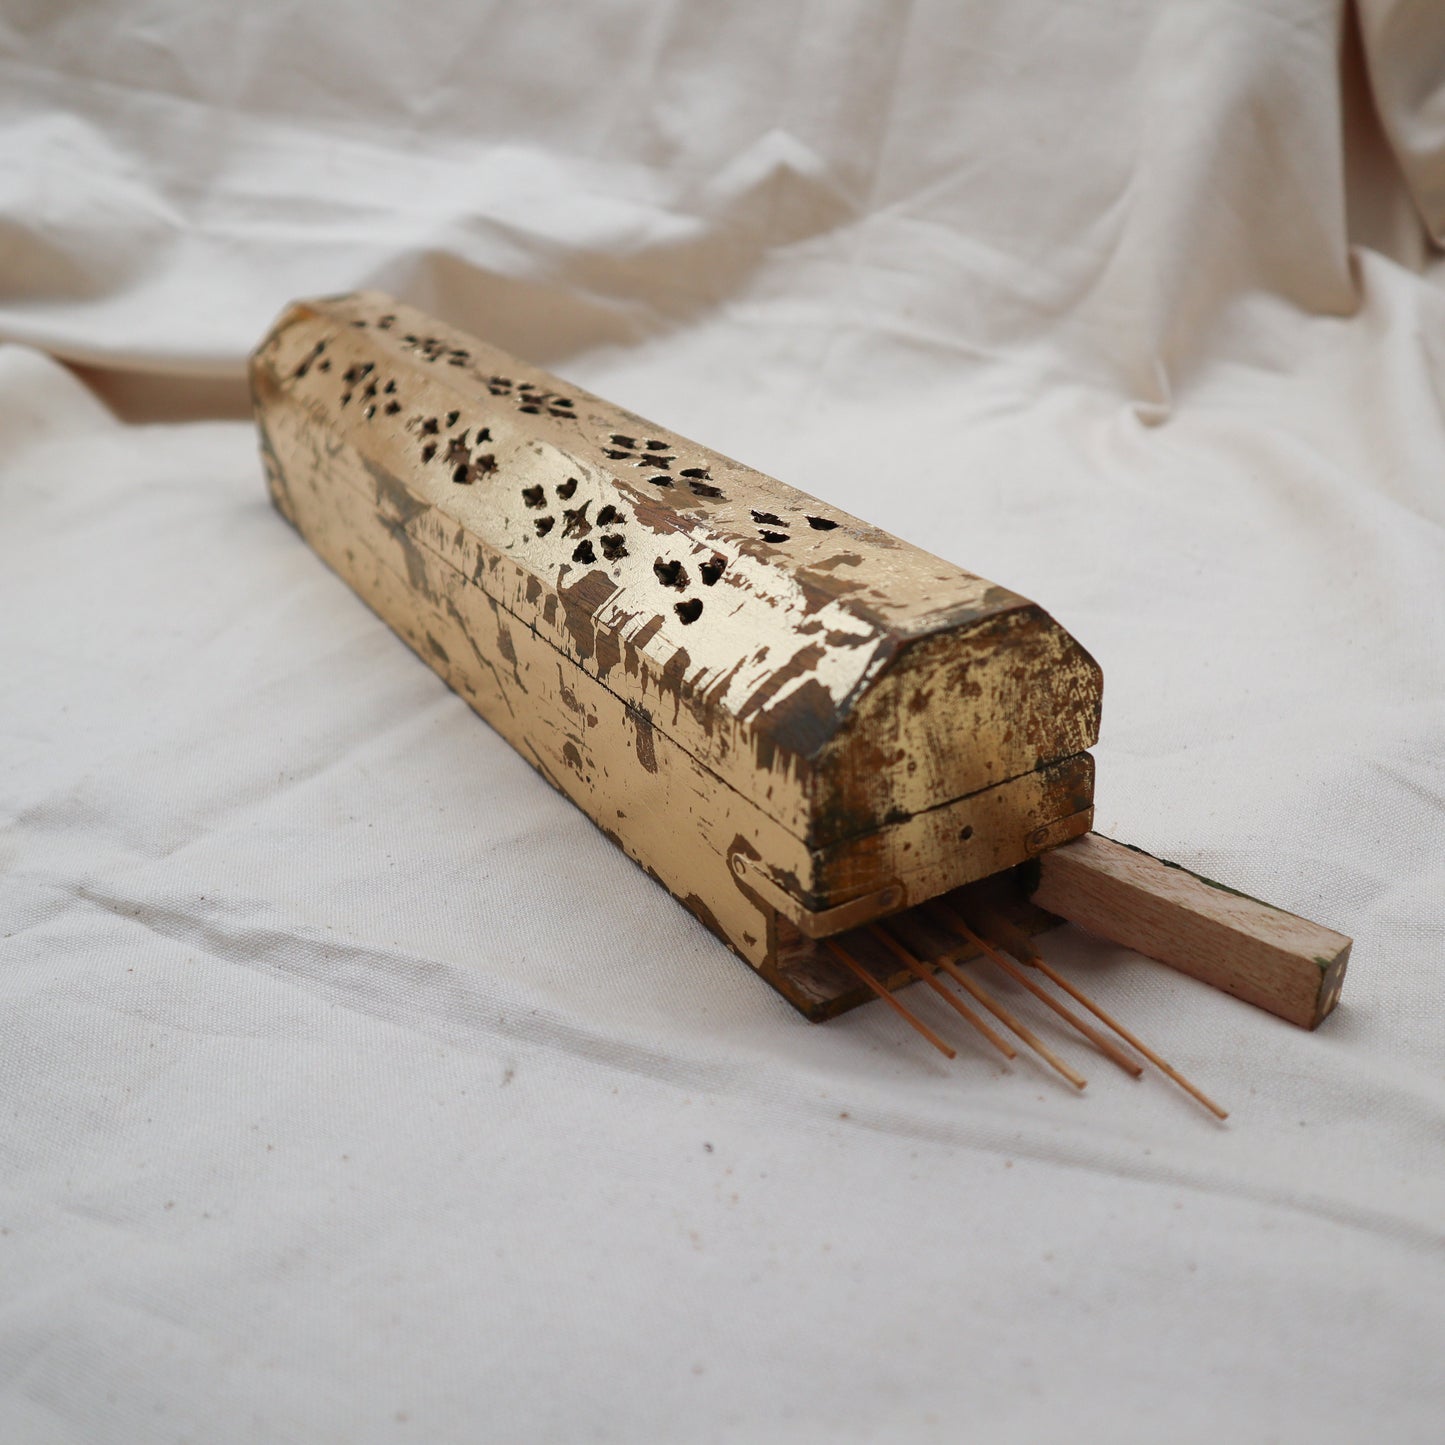 Wooden incense box